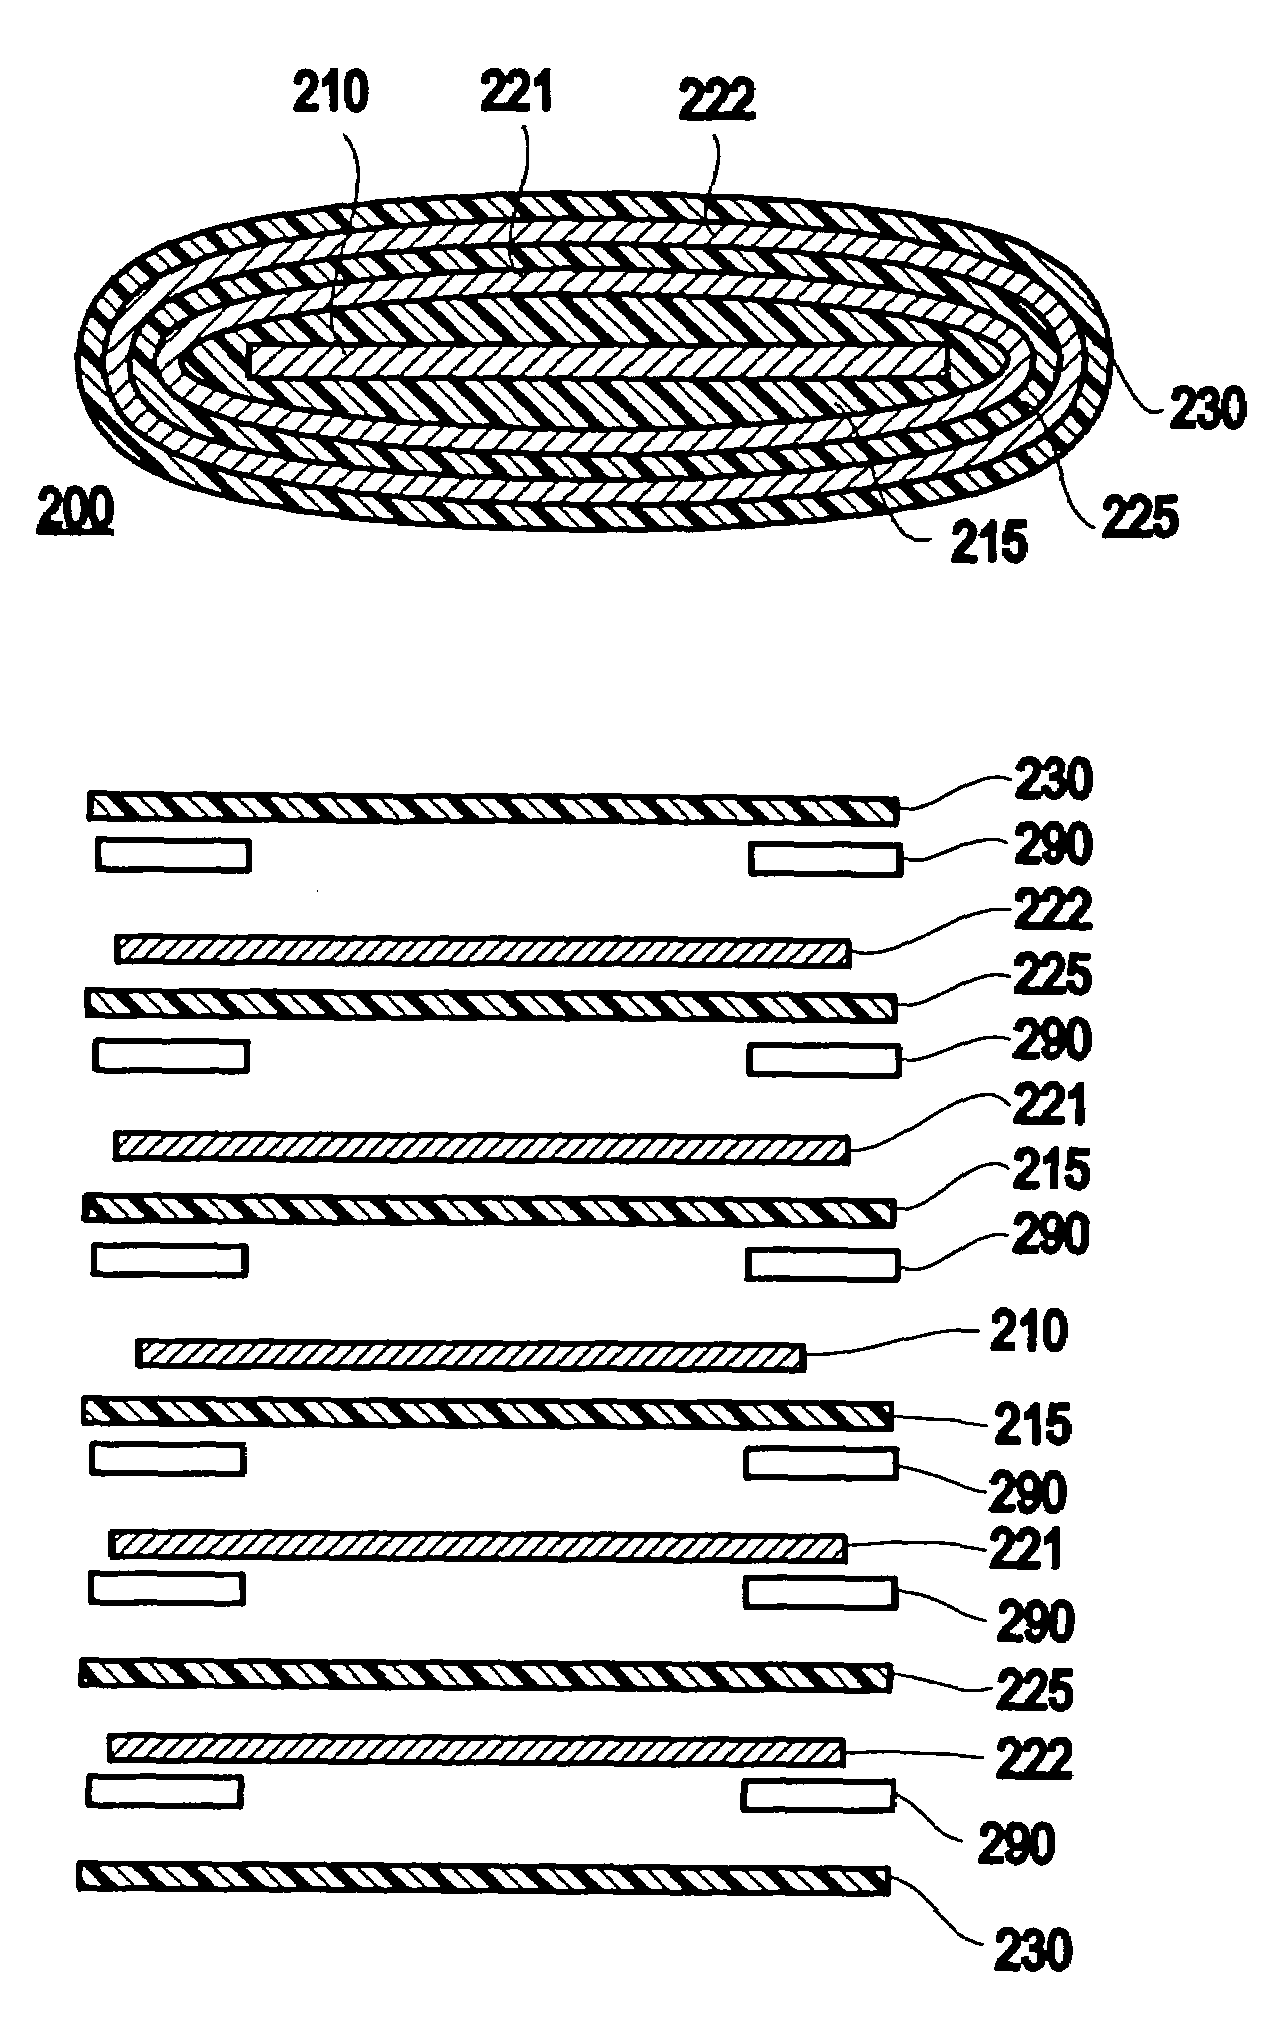 Electrical wire and method of fabricating the electrical wire